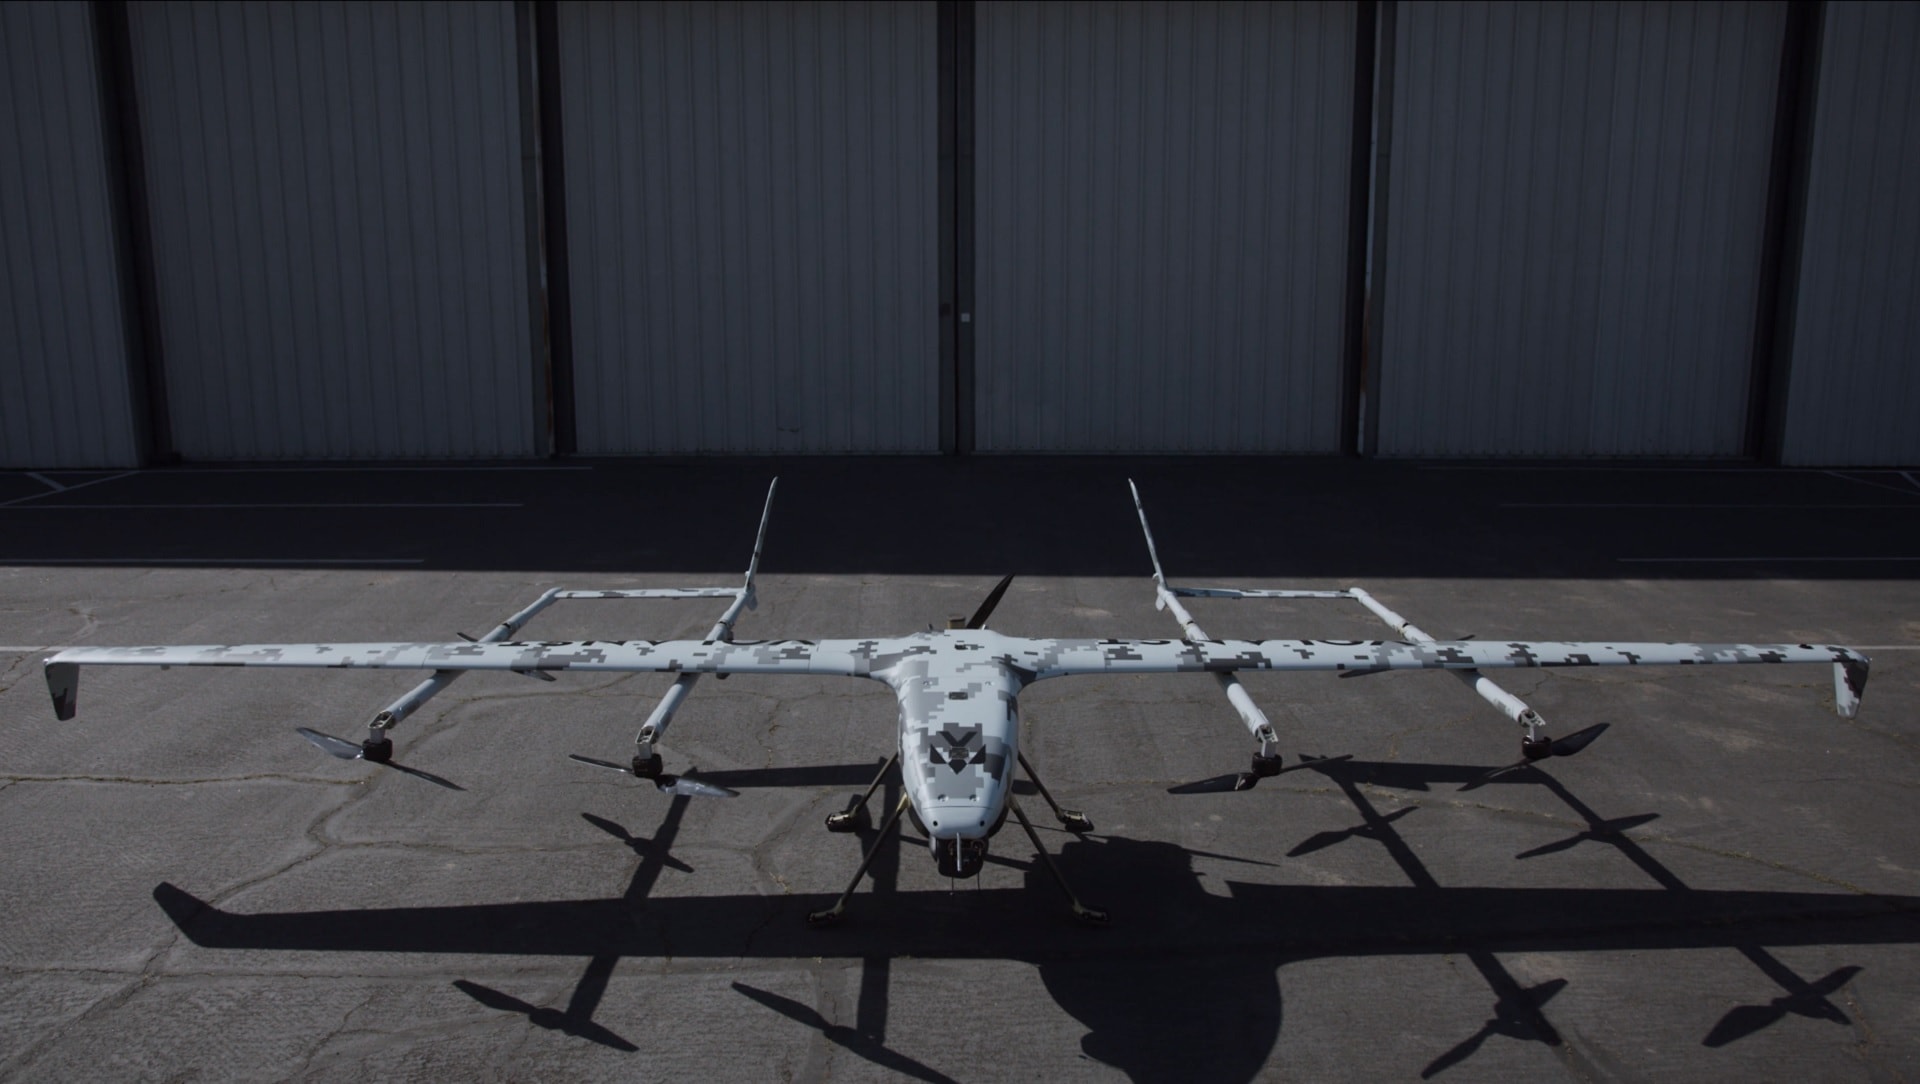 Volansi's New Modular Drone Is Built to Go the Distance, Can Fly for Eight  Hours at 70 MPH - autoevolution